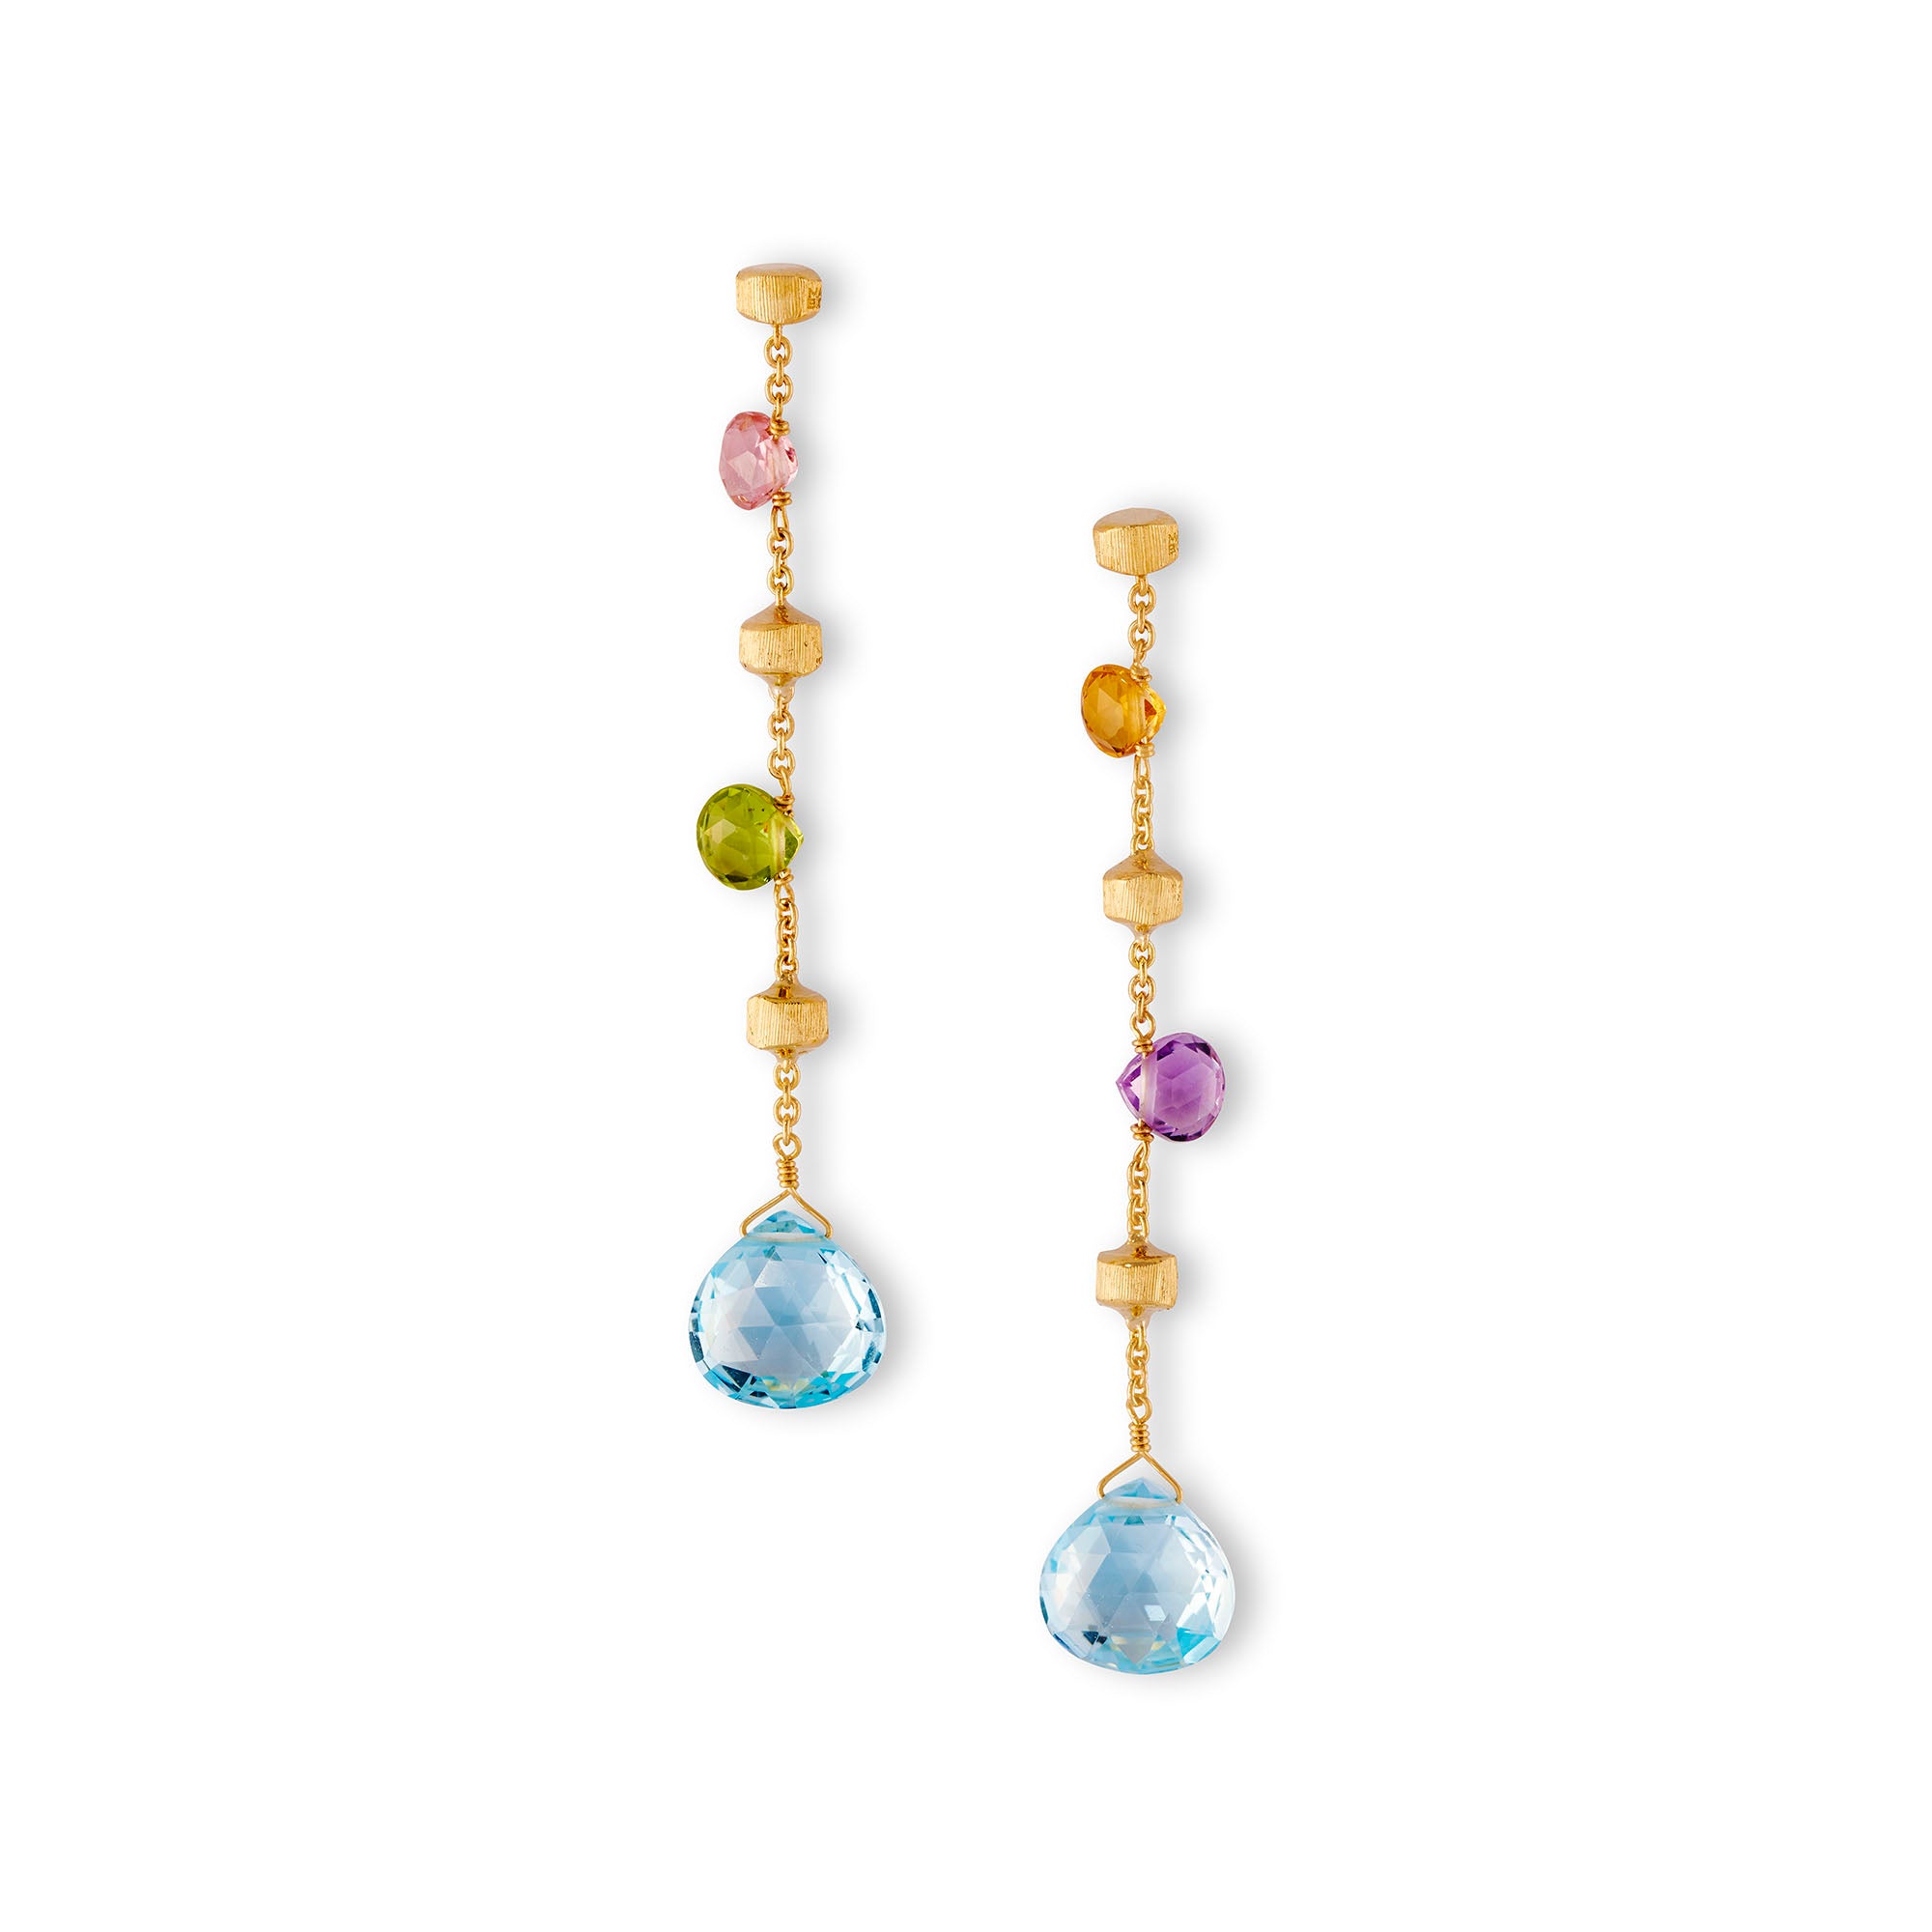 New Paradise 18ct yellow gold and multi gemstone earrings by Marco Bicego